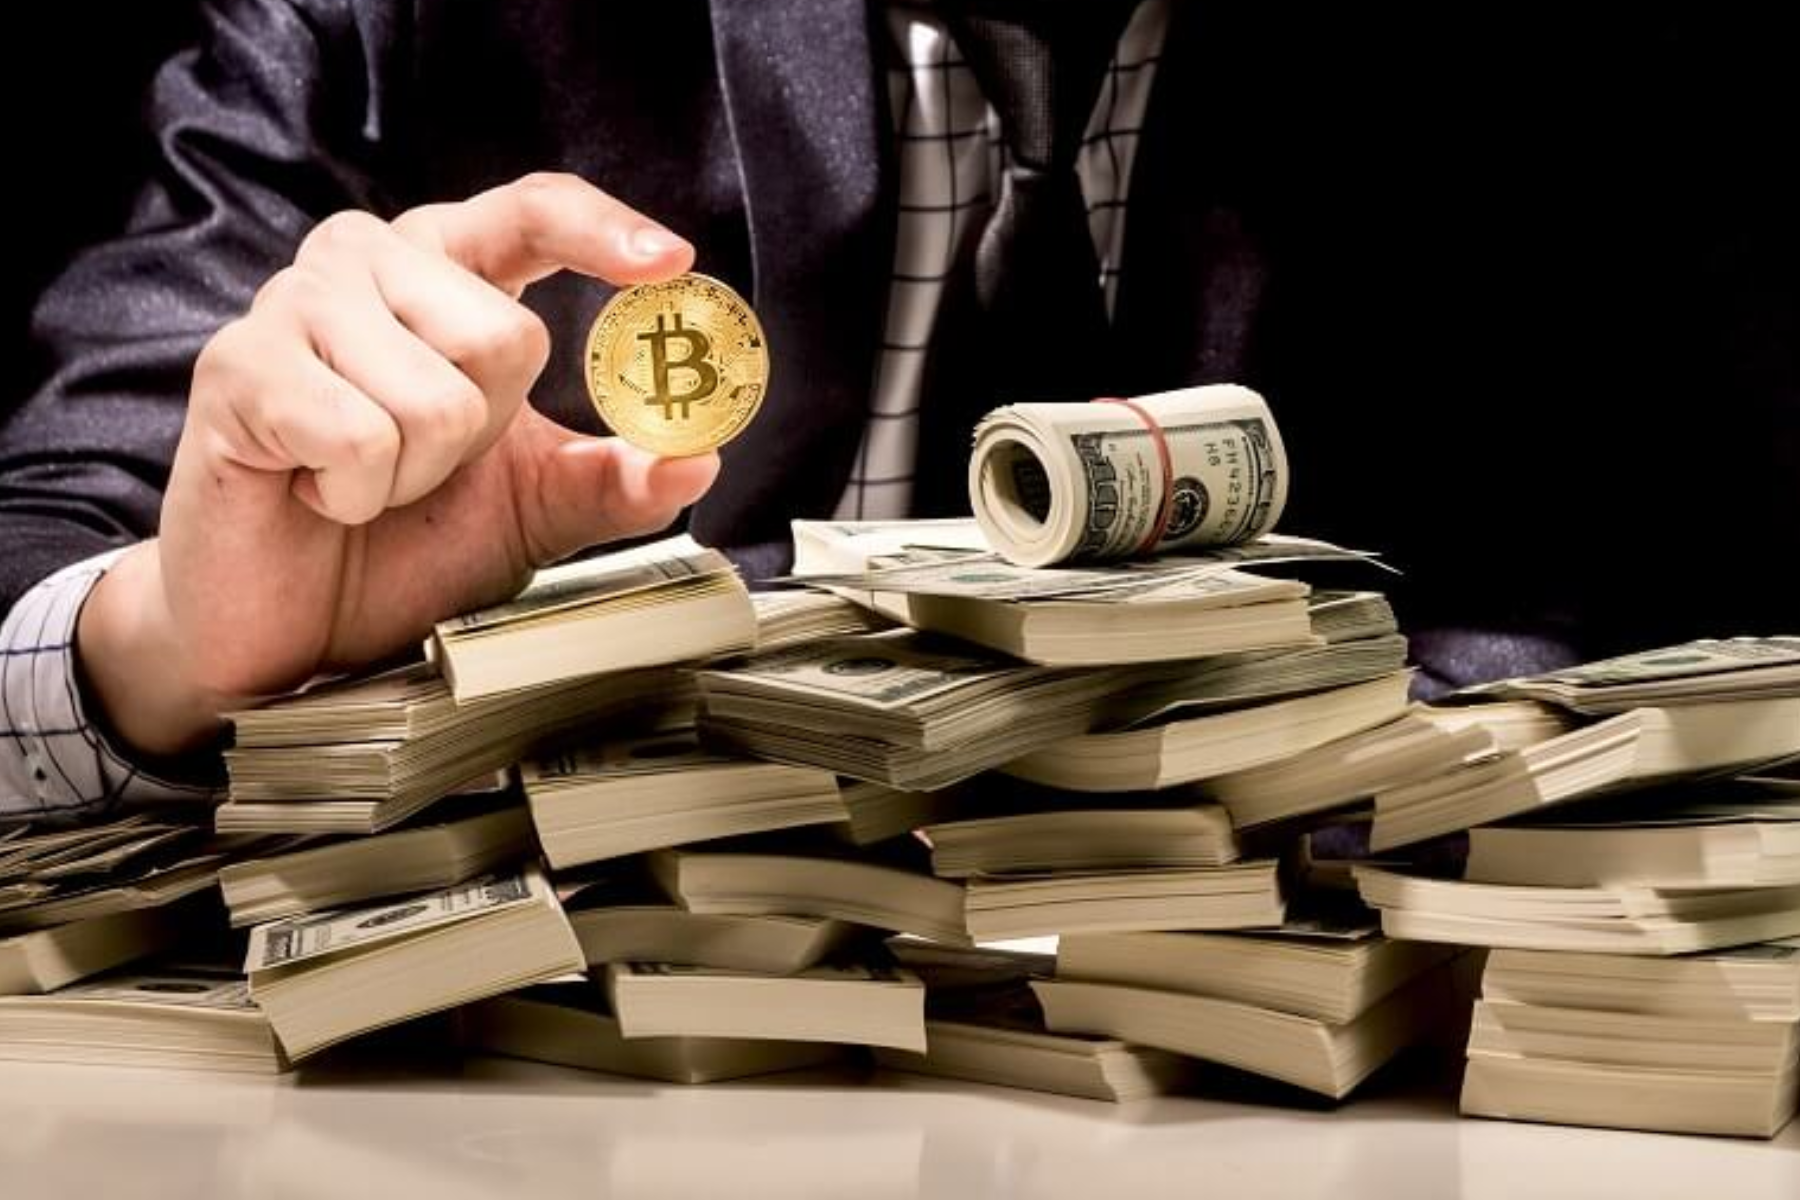 A man holds a bitcoin in front of money on a table